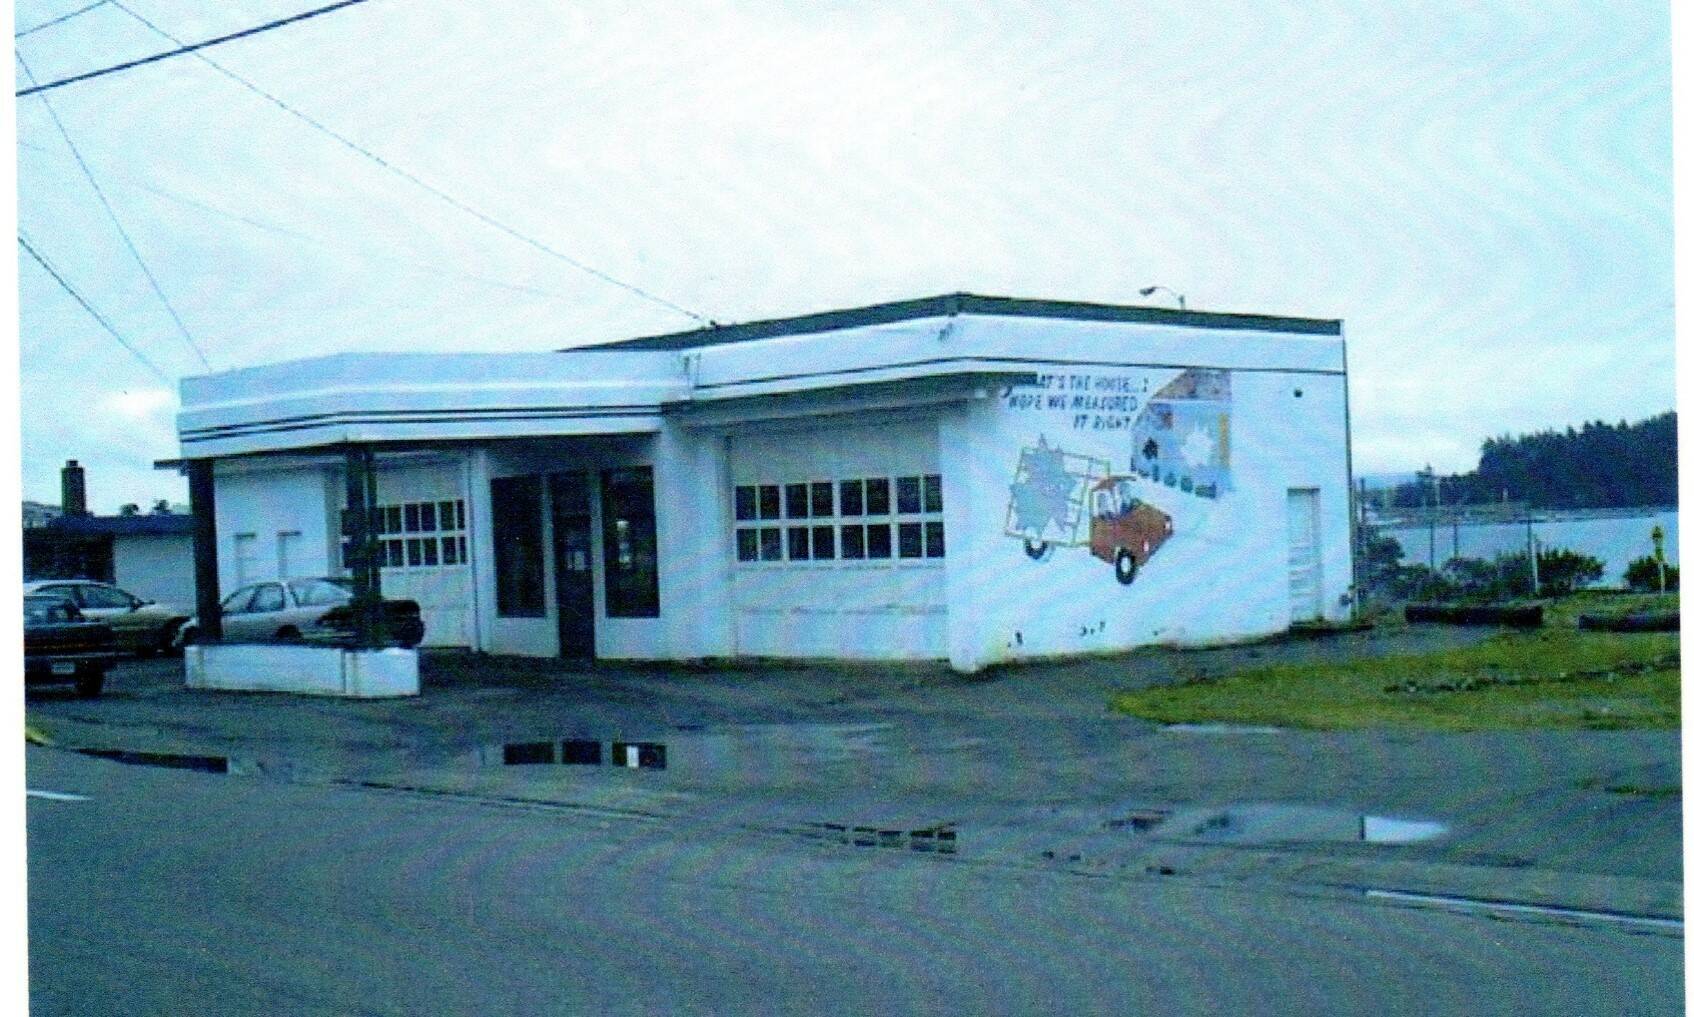 The gas station on Pioneer Way was the first home of what is now the Pacific Northwest Naval Air Museum.